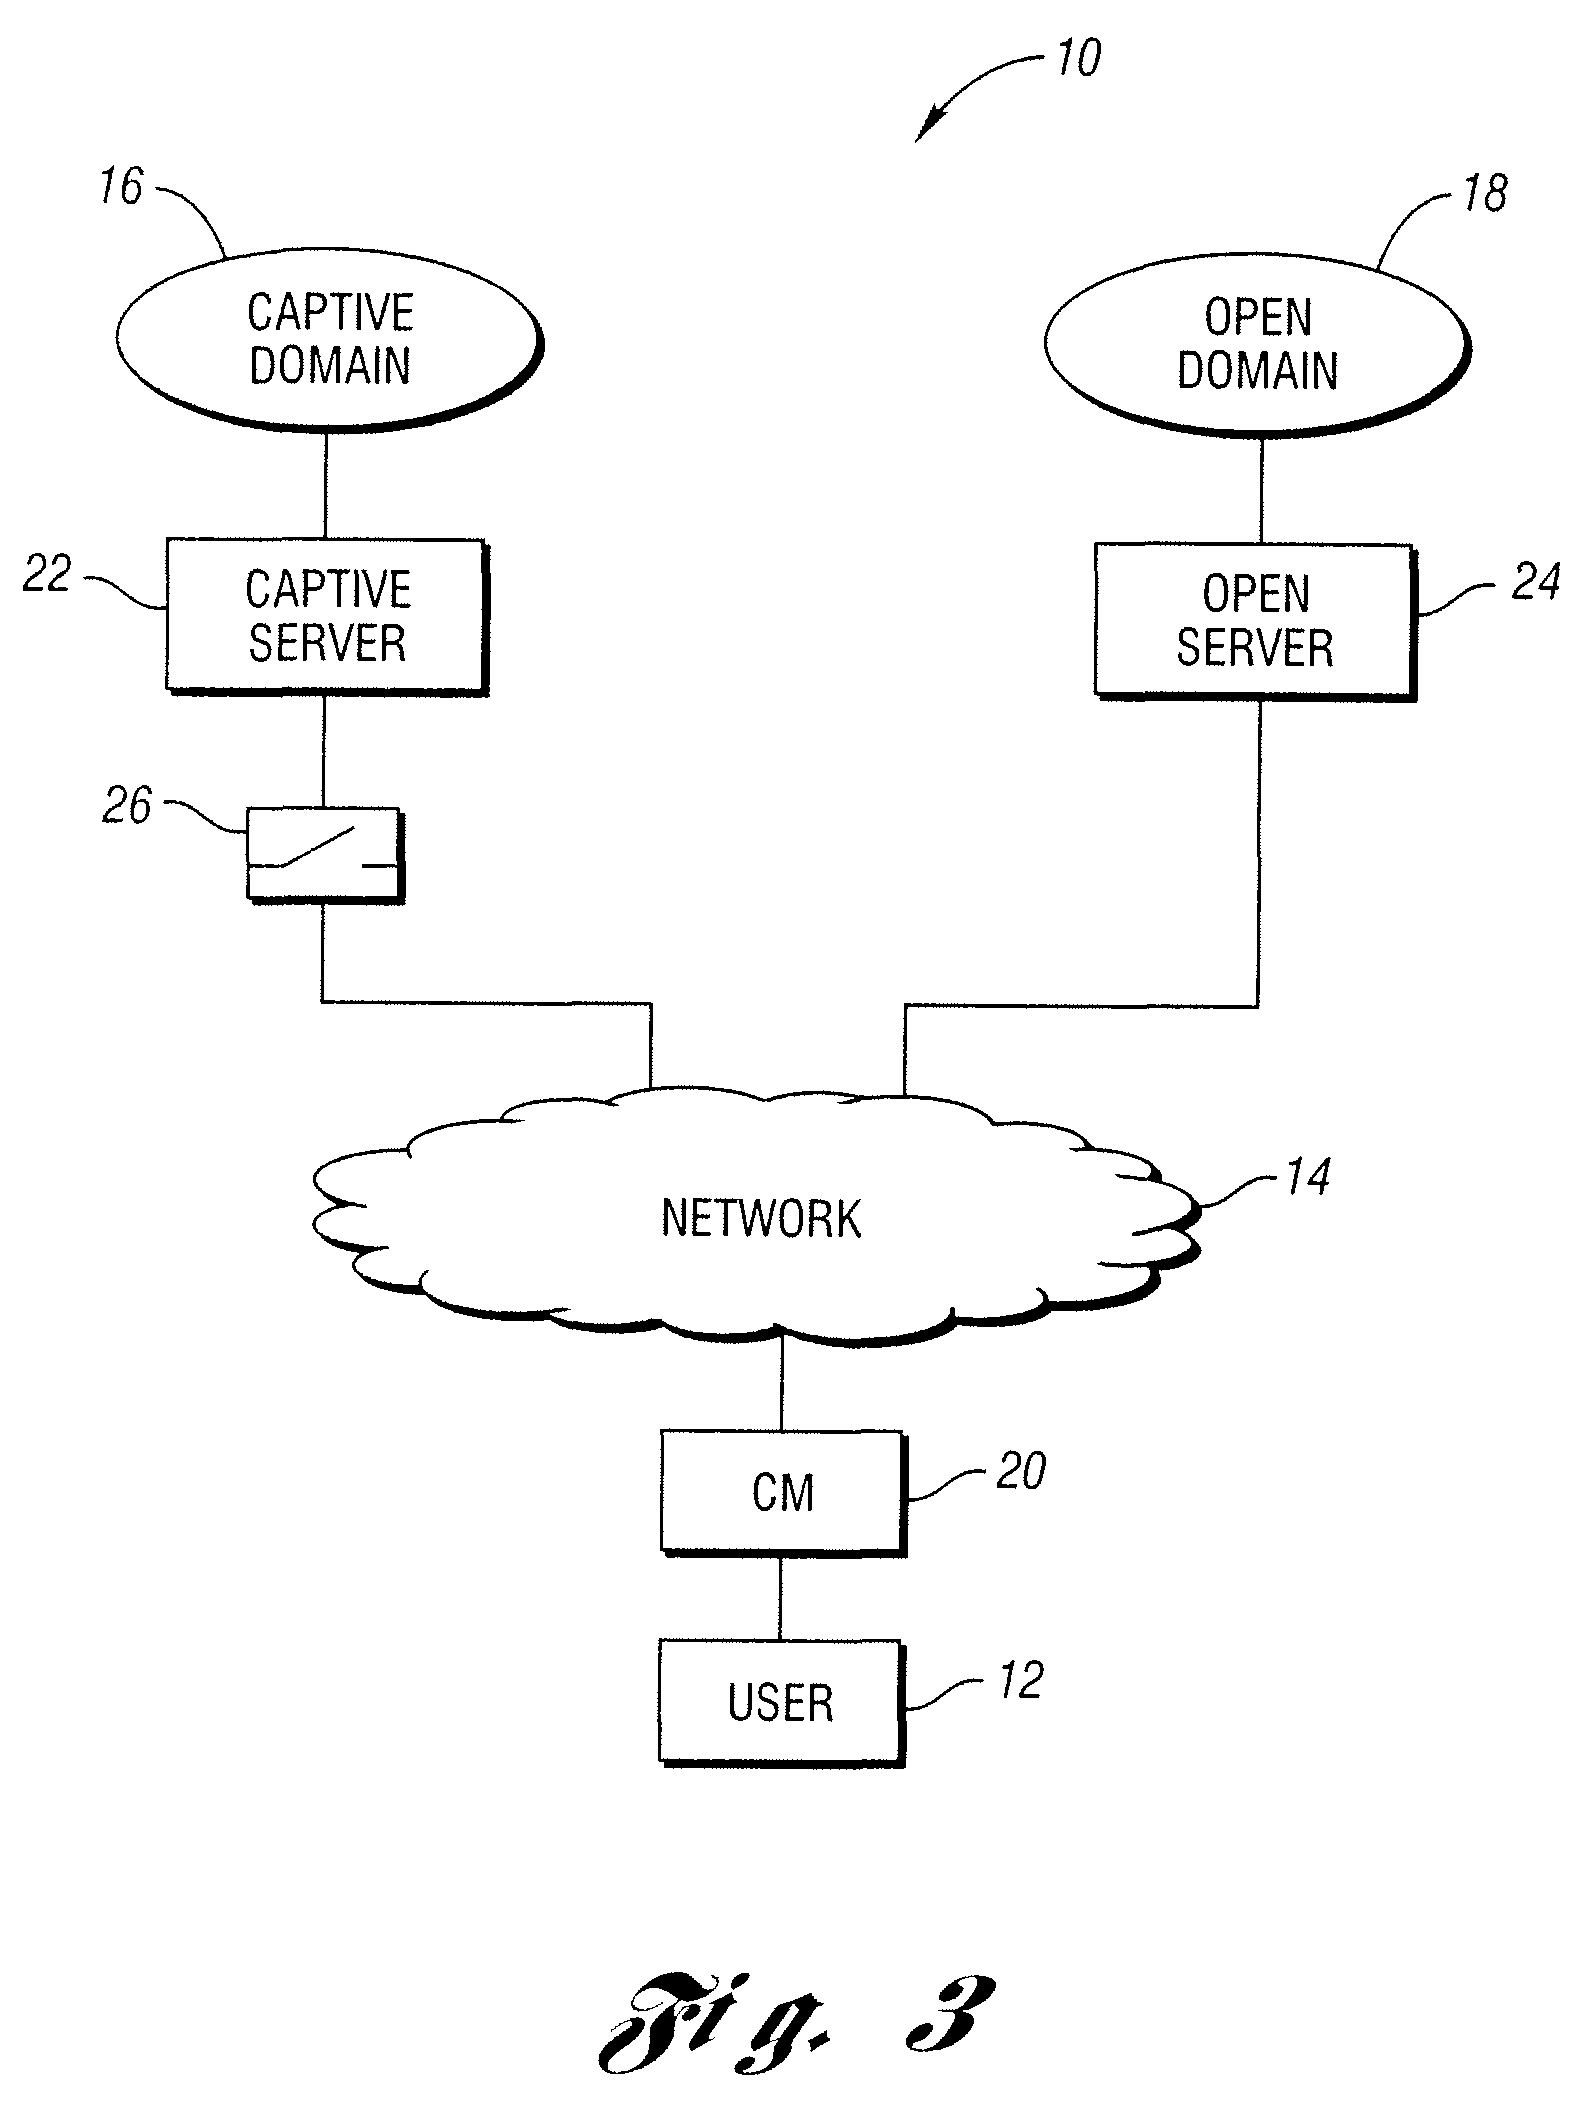 Method and system for directing user between captive and open domains